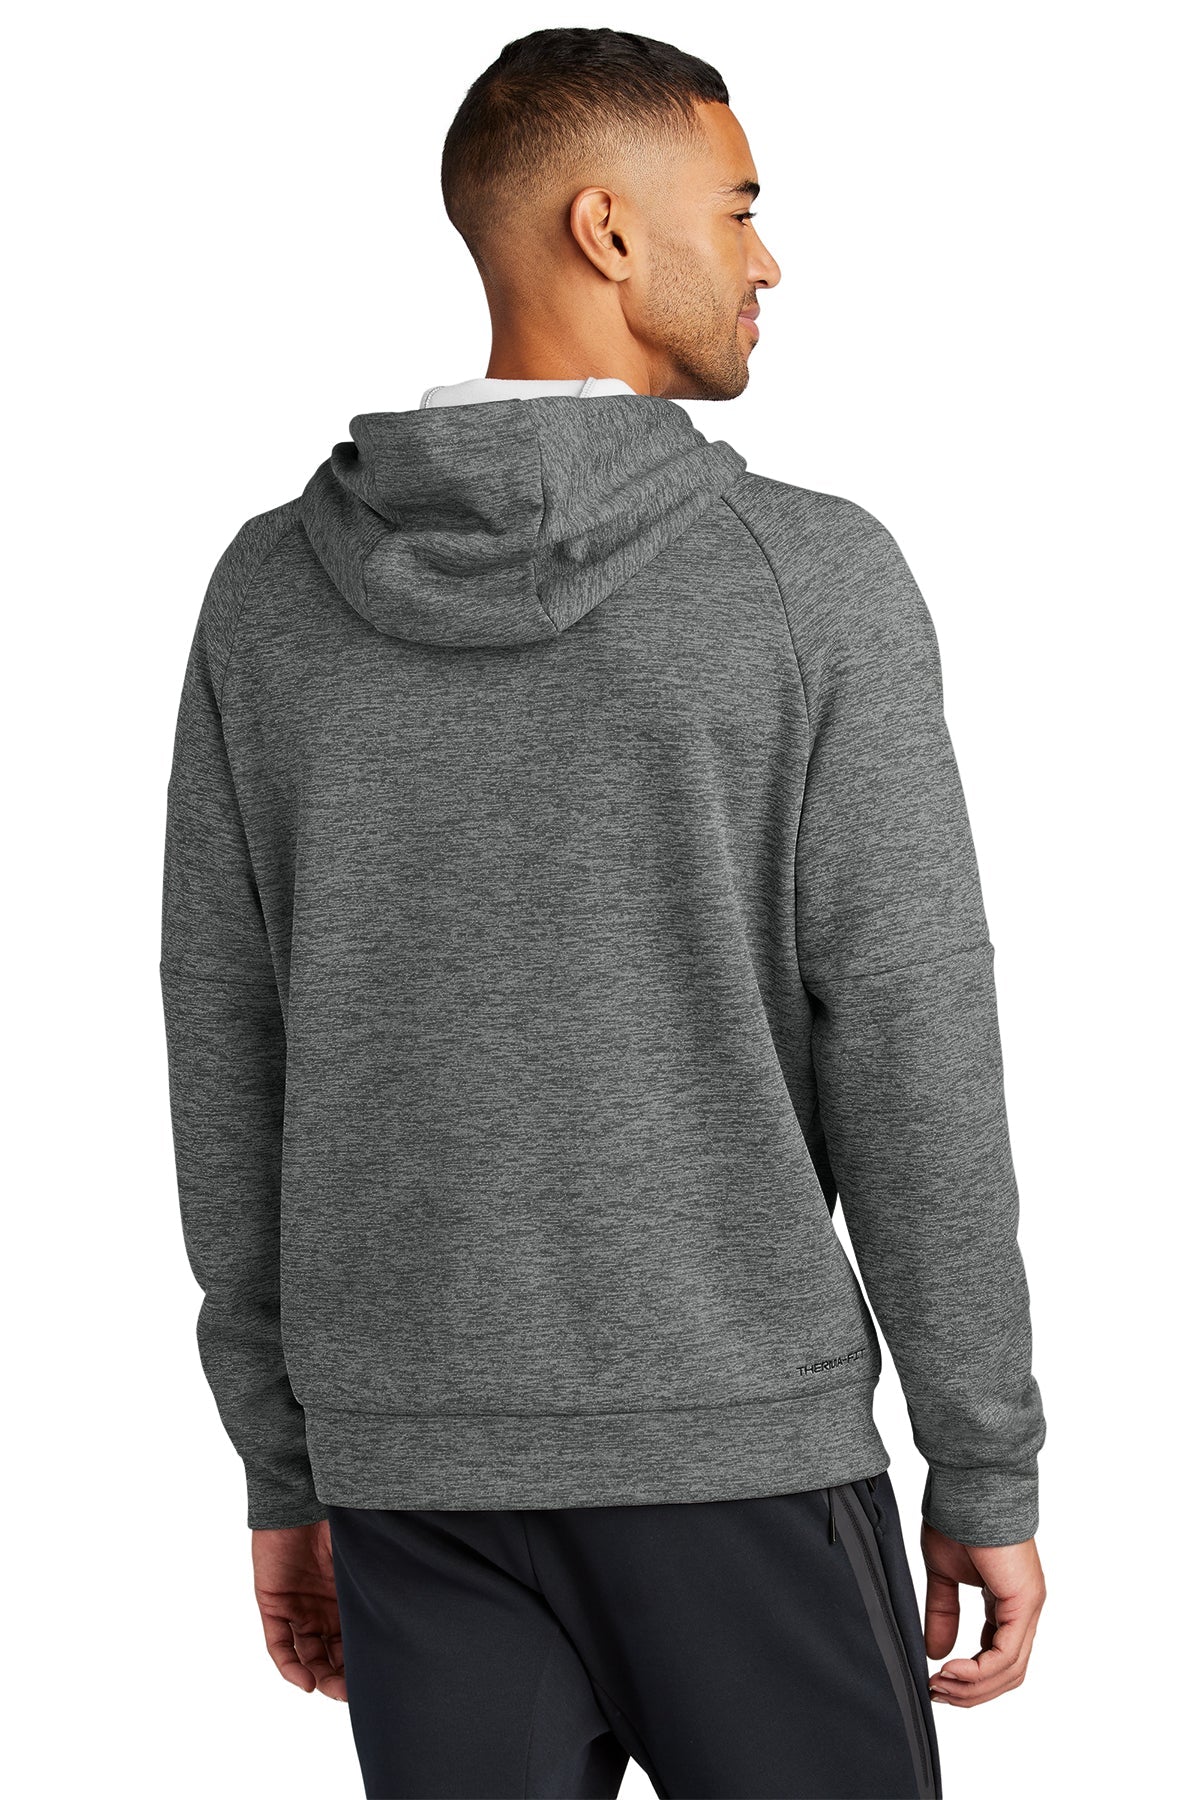 Nike Therma-FIT Pocket Pullover Branded Hoodies, Charcoal Heather